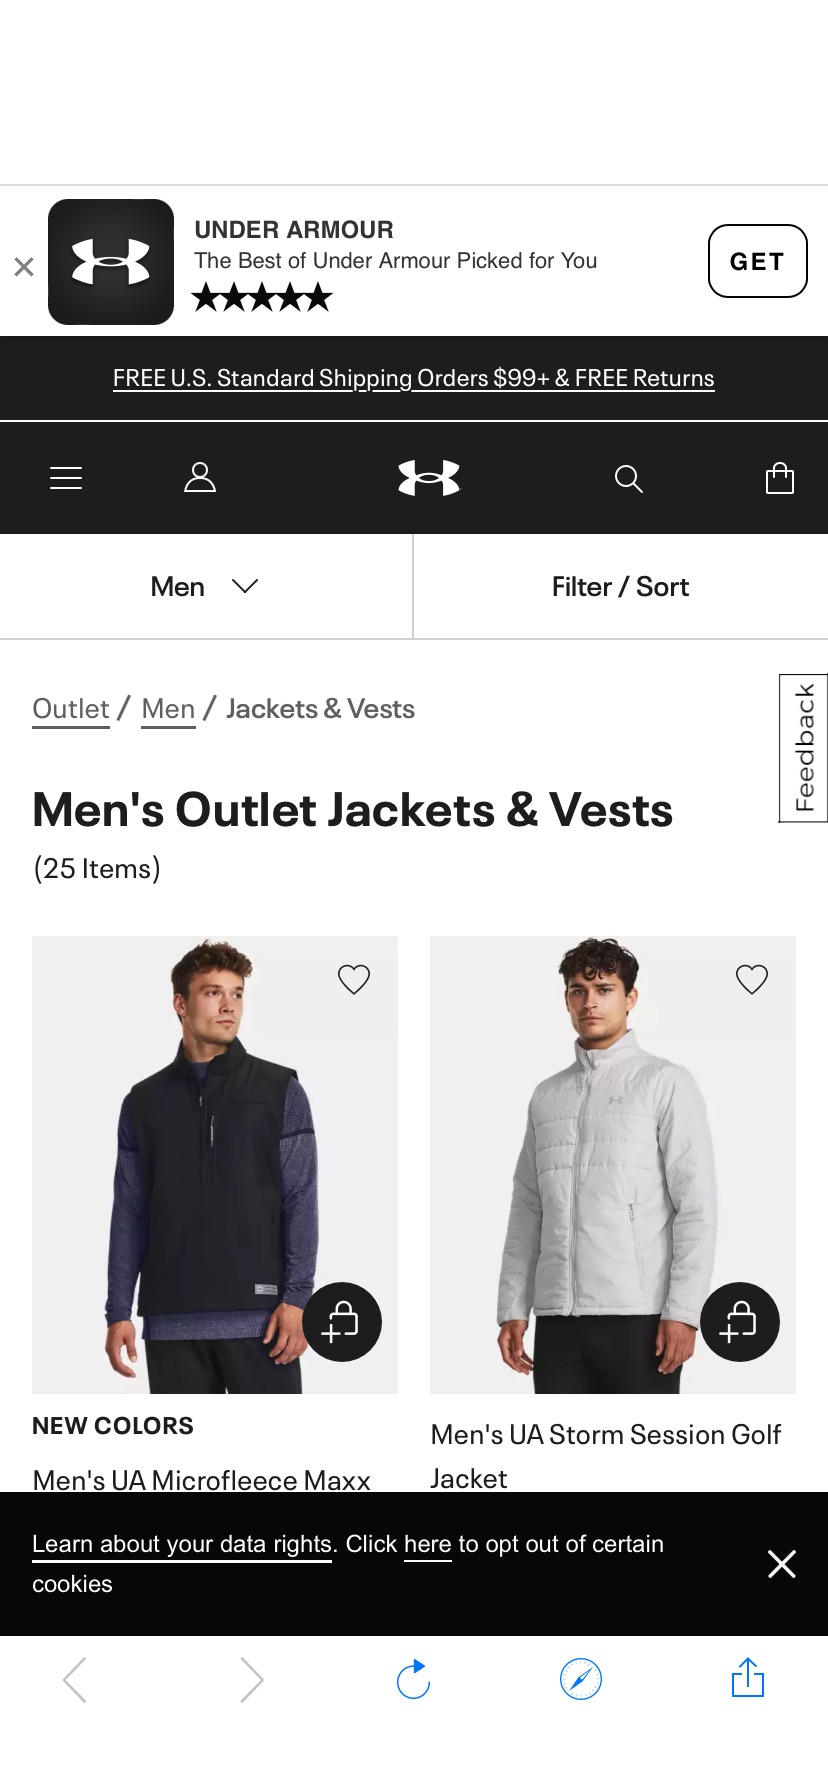 Under Armour Outlet Men's Jackets
Up to 50% off + extra 30% off
free shipping
Get an extra 30% off already discounted styles with code "30FORYOU"